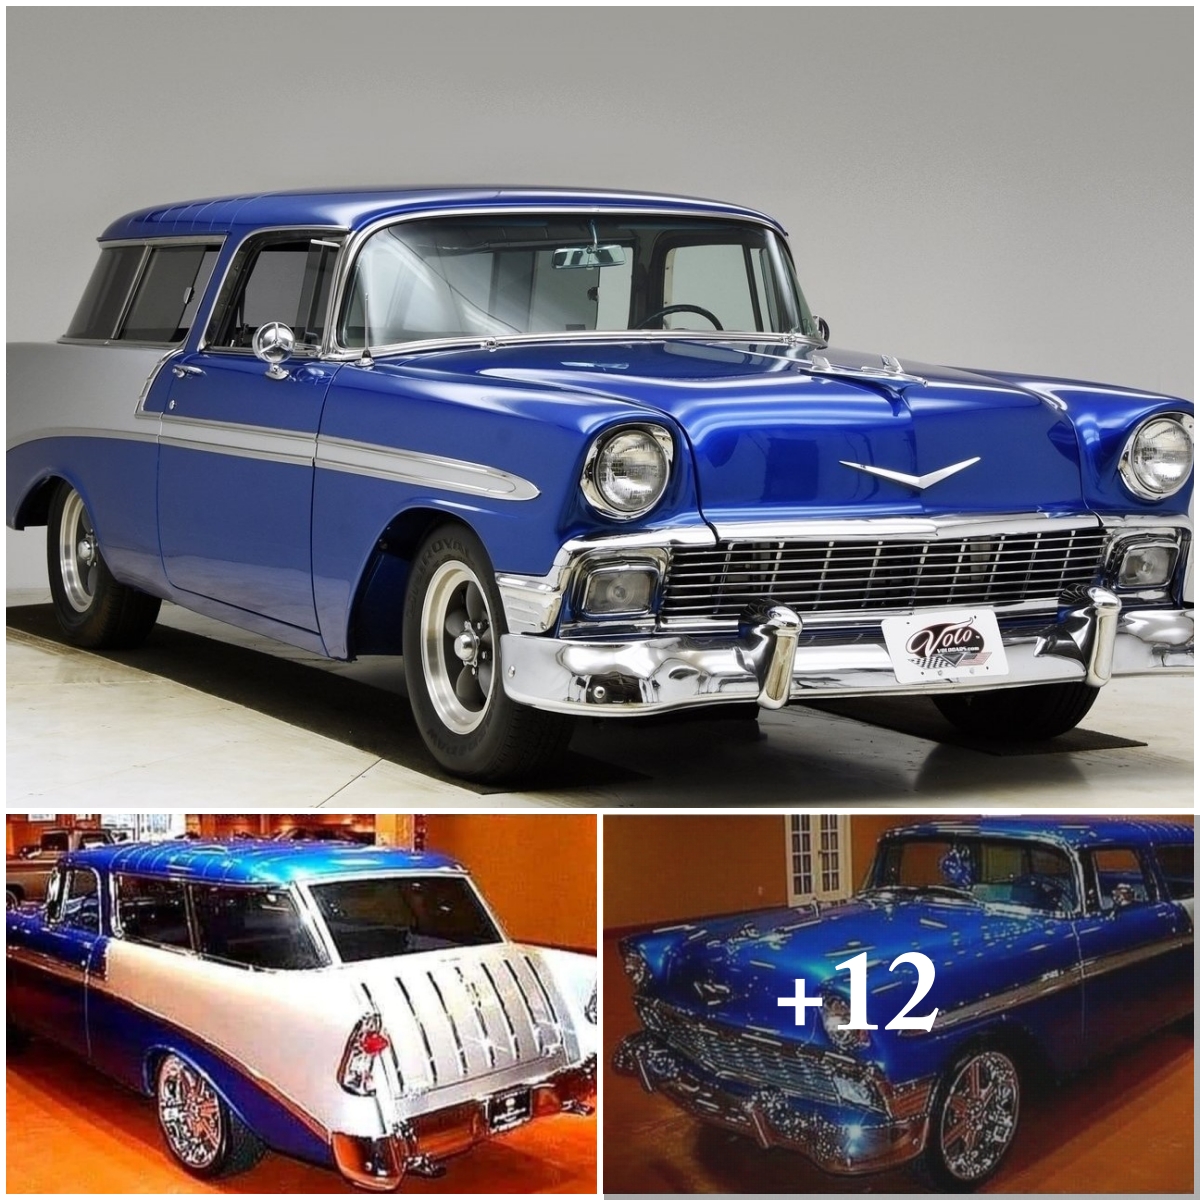 The 1956 Chevy Nomad: A Timeless Beauty